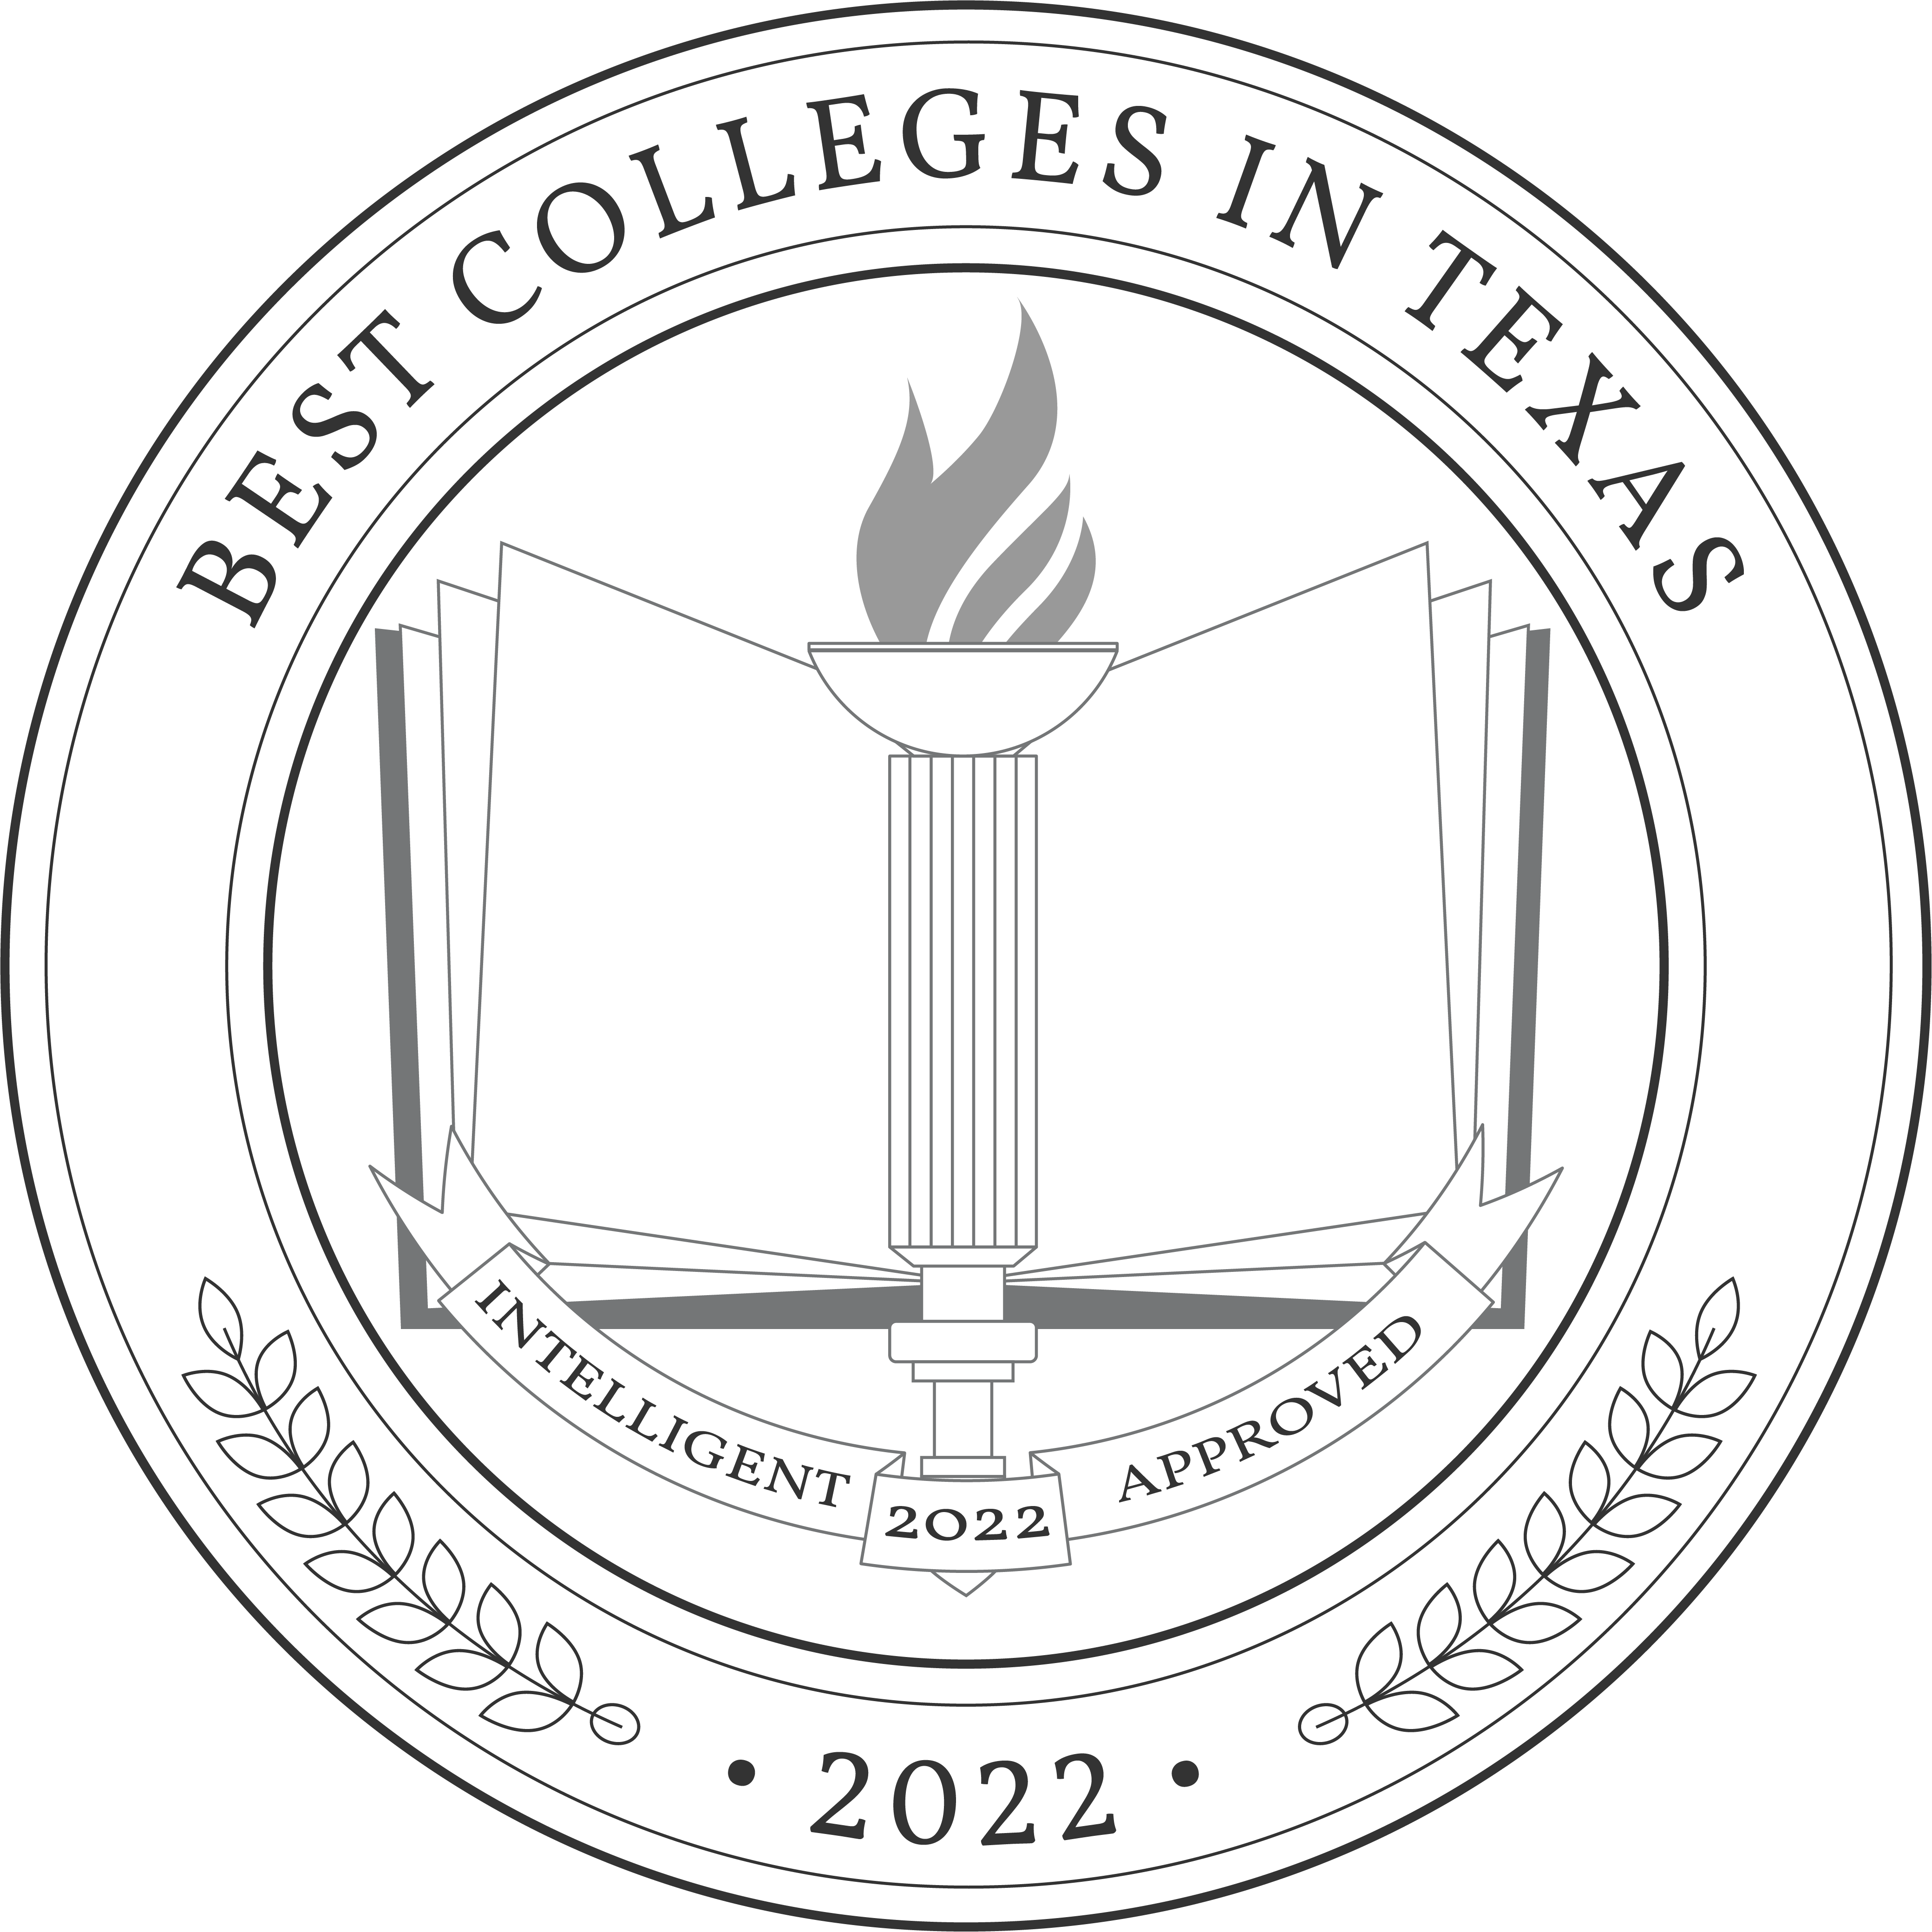 Best-Colleges-in-Texas-Badge.png